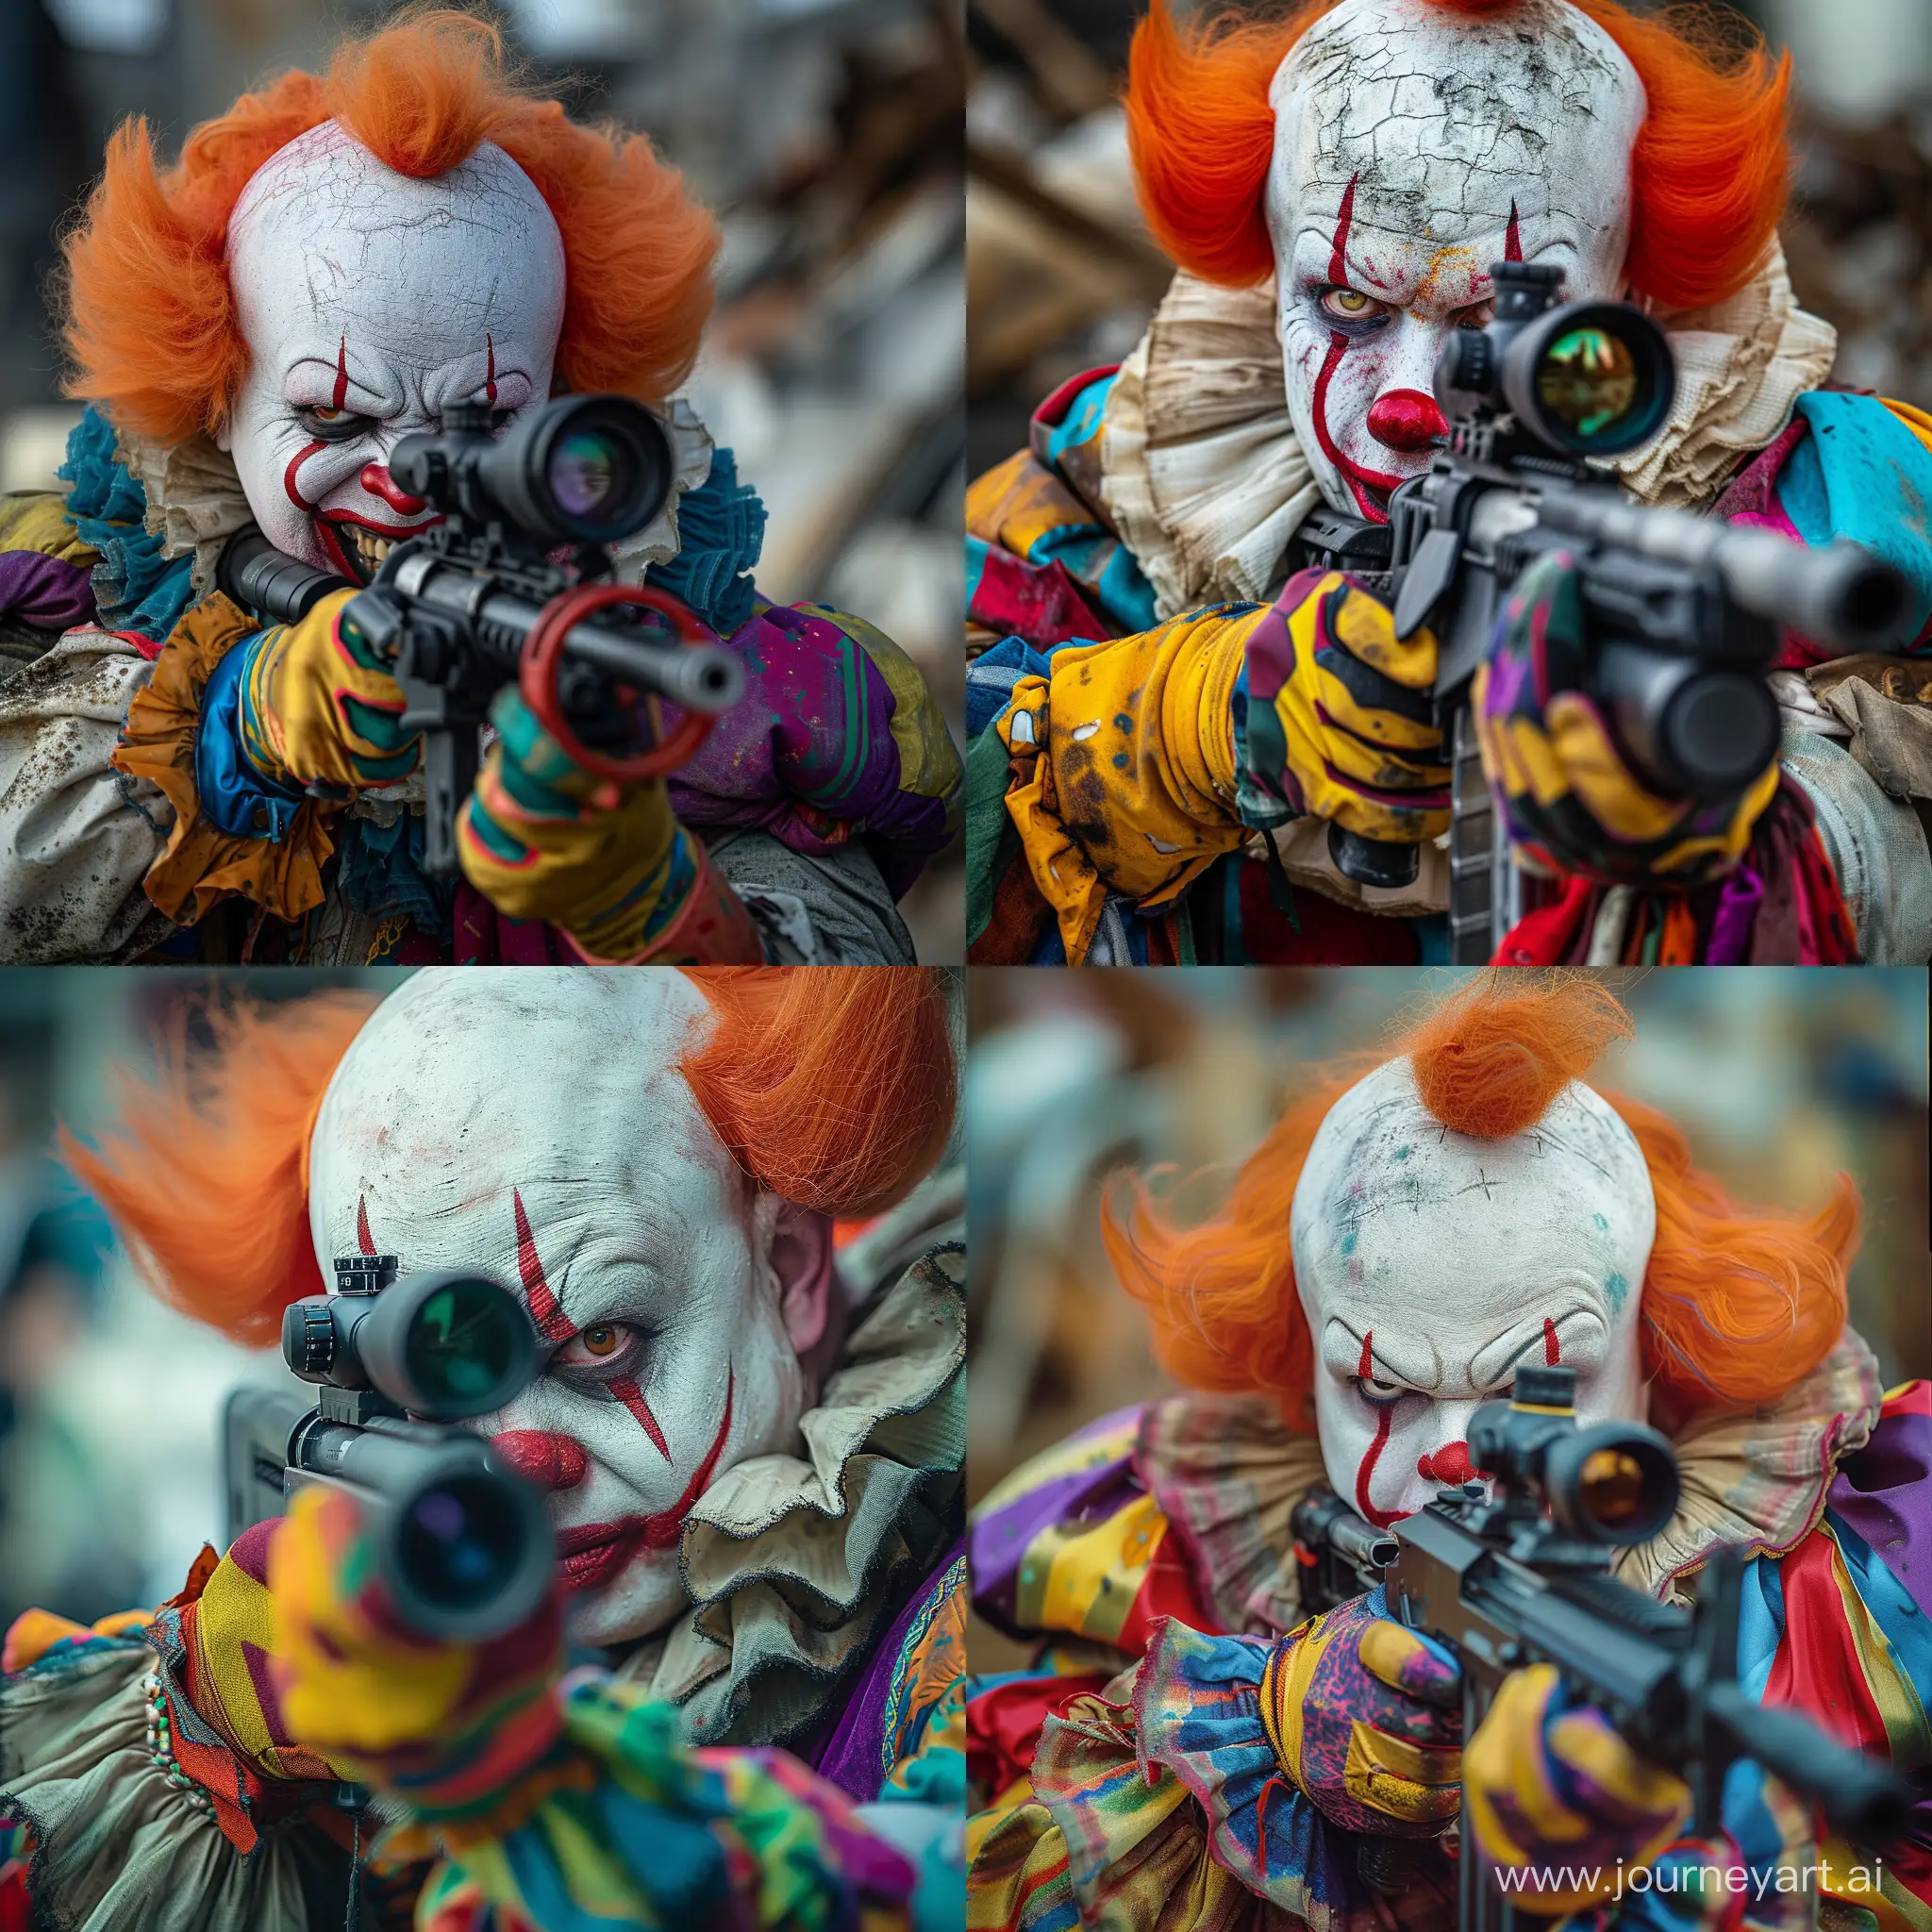 Menacing-Clown-with-Firearm-in-Chaotic-PostApocalyptic-Setting